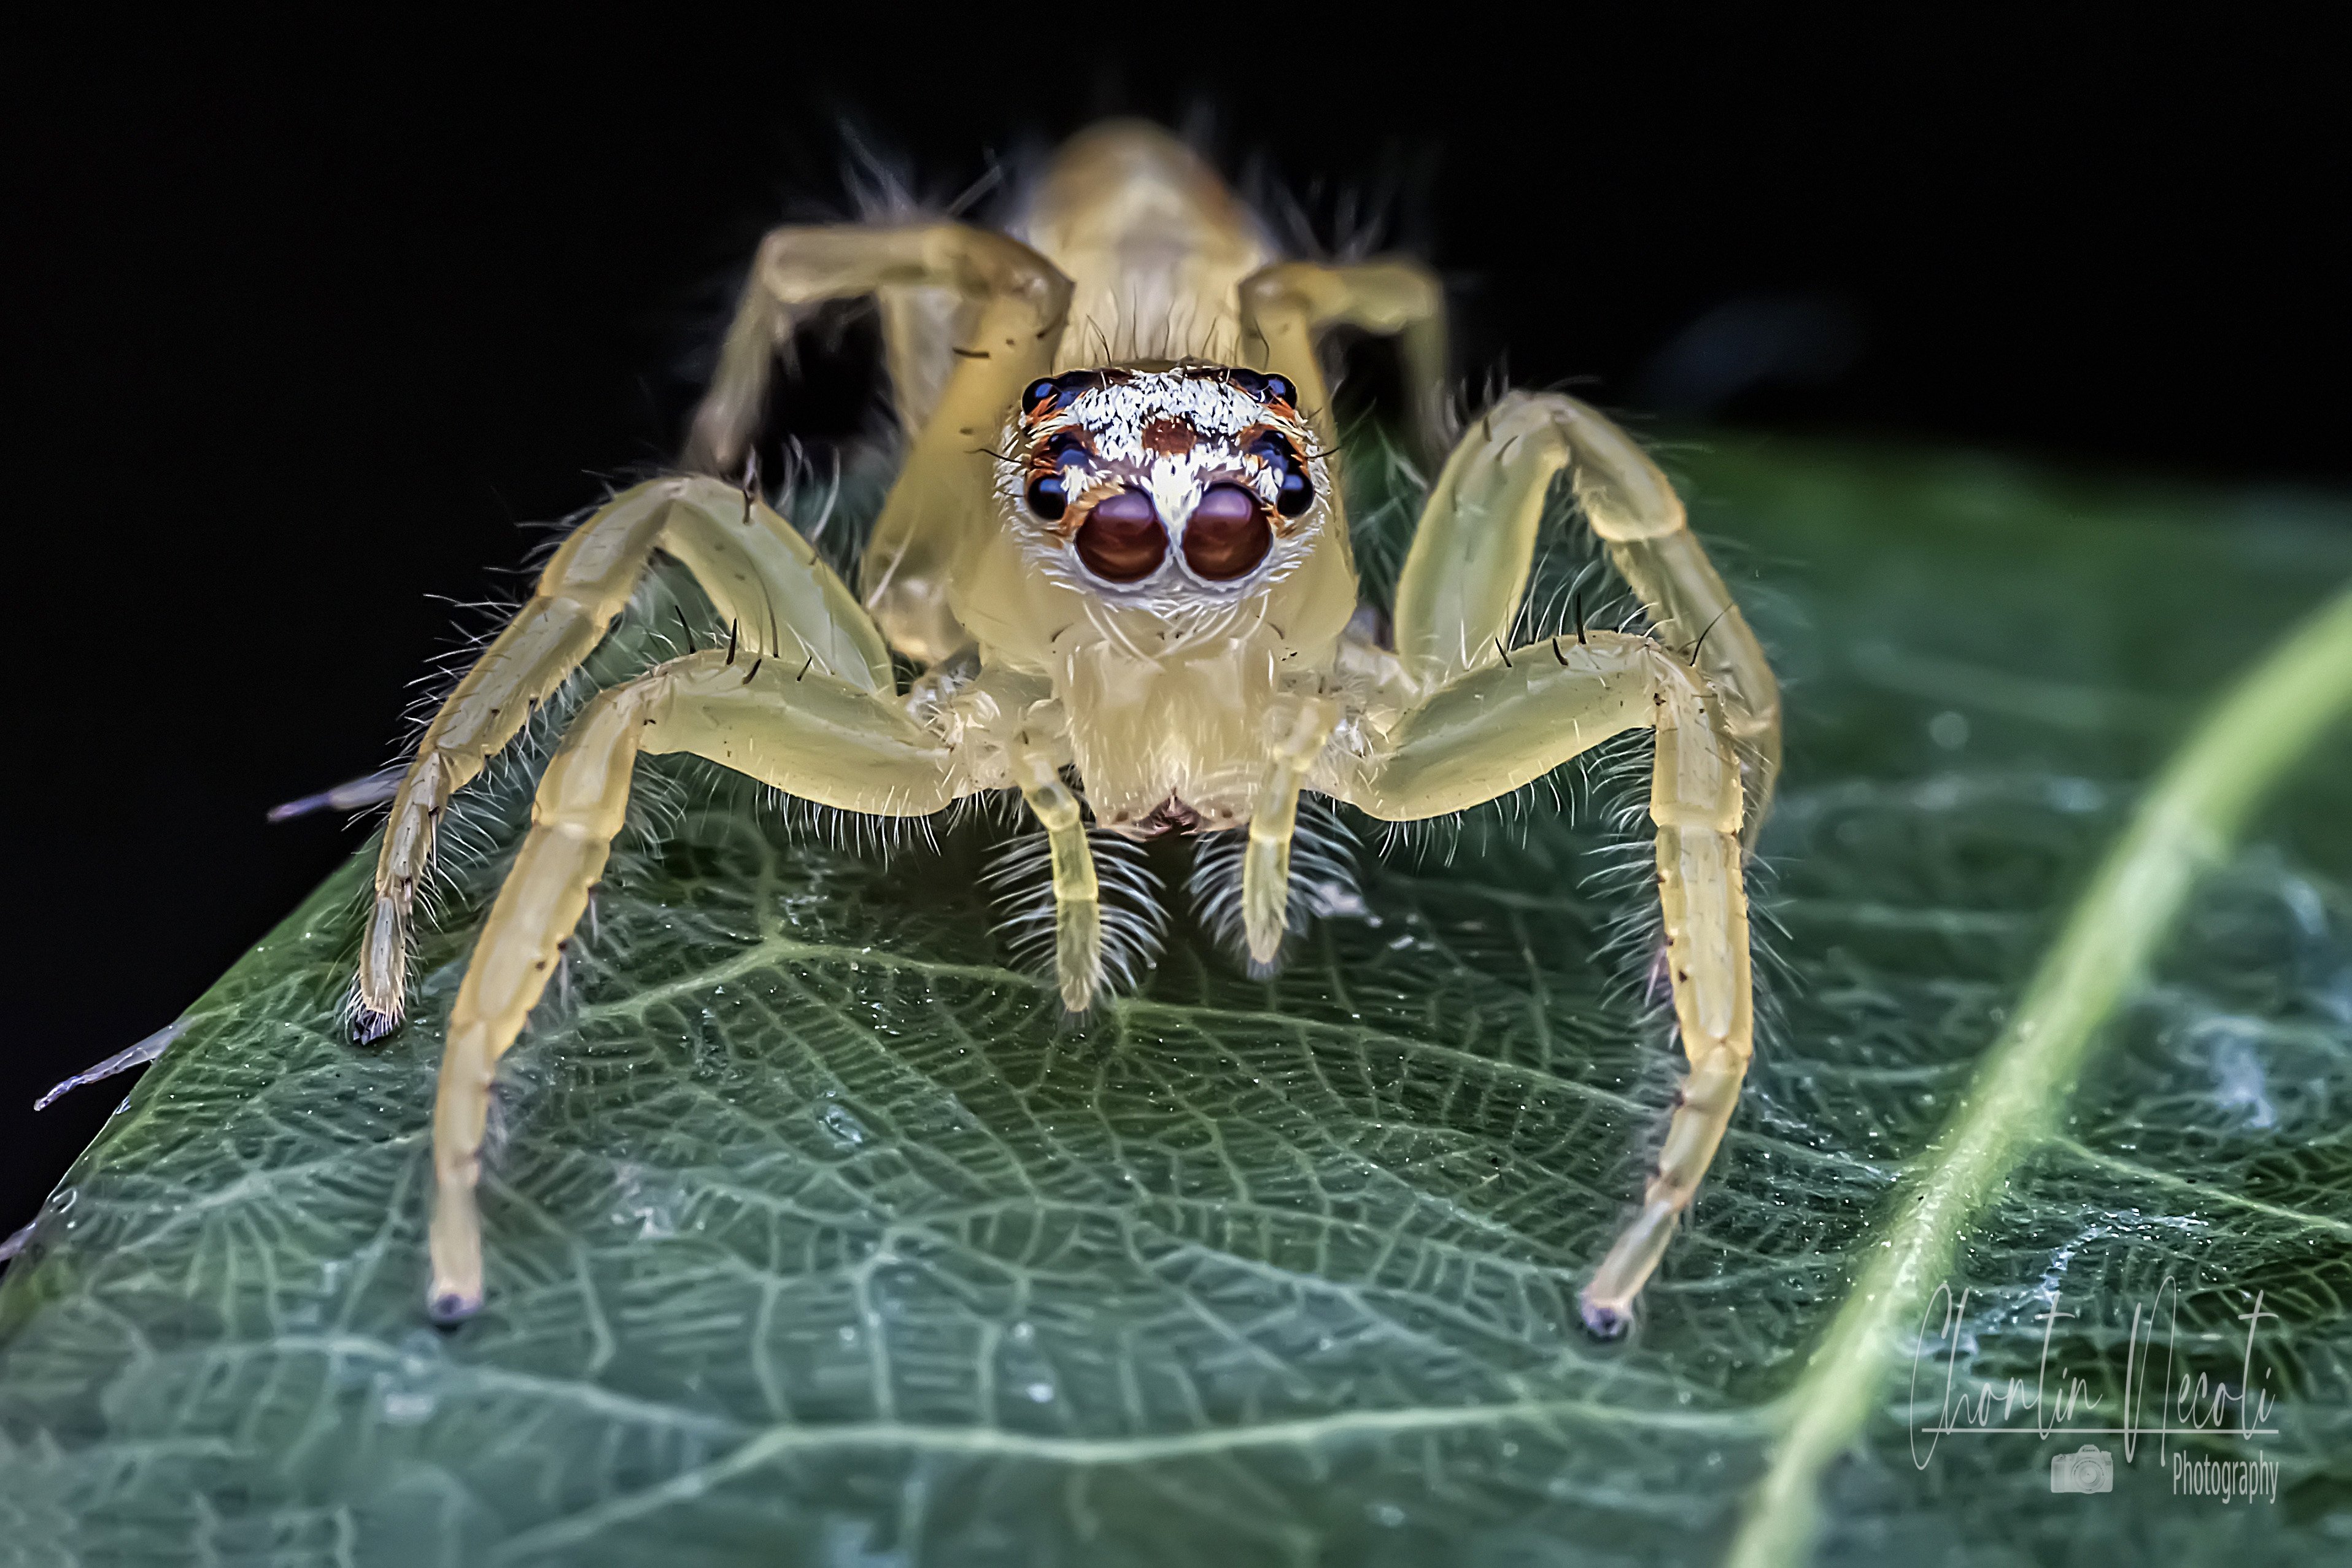 spider, macro, close up, small, outdoor, wildlife, legs, eyes, jumping, nature, natural, leaf, forest, beautiful, NeCoTi ChonTin